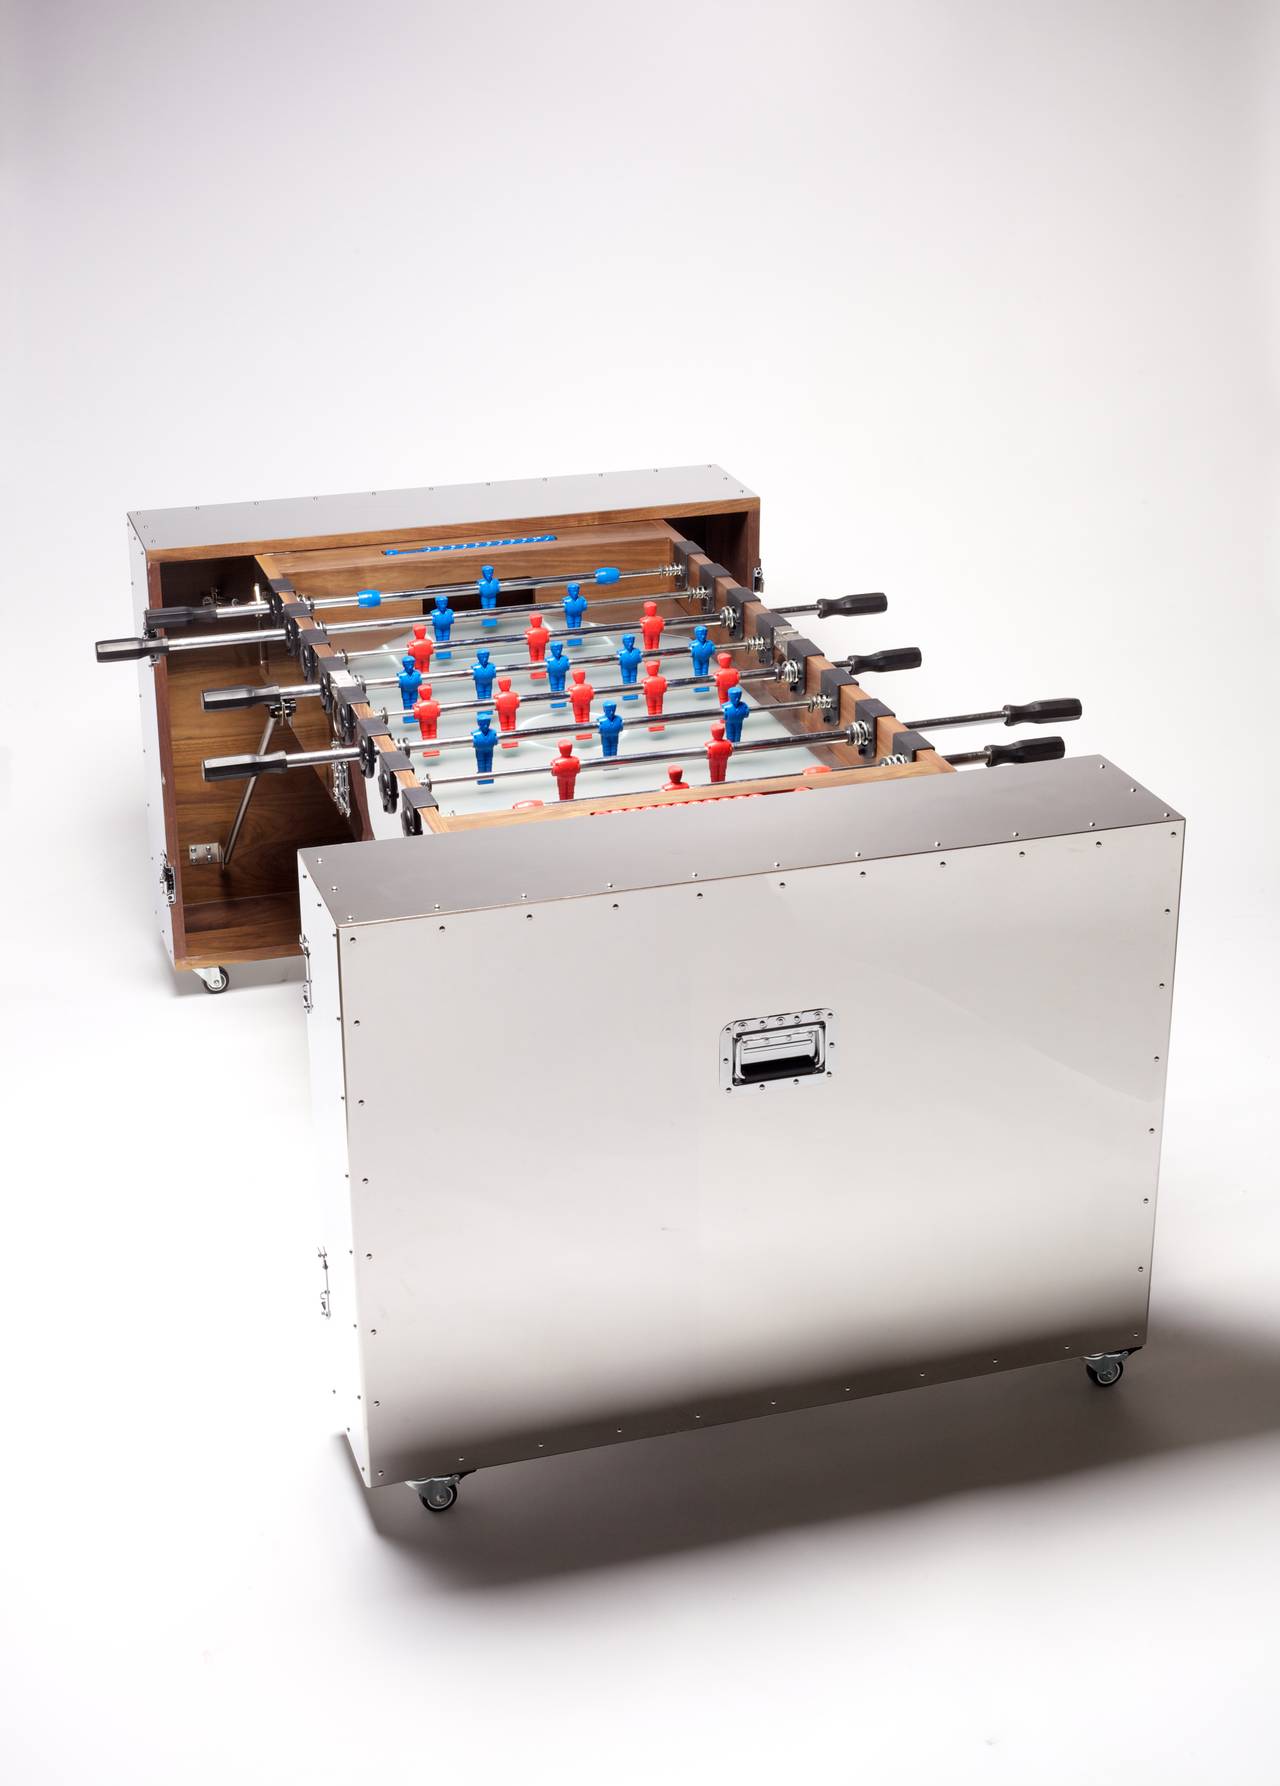 The newest addition to the Crates Stainless Steel series includes a foosball table, an expandable fun piece while meticulous engineering and construction happening at the same time. 

Naihan’s idea for the CRATES originated from the uncertainty of